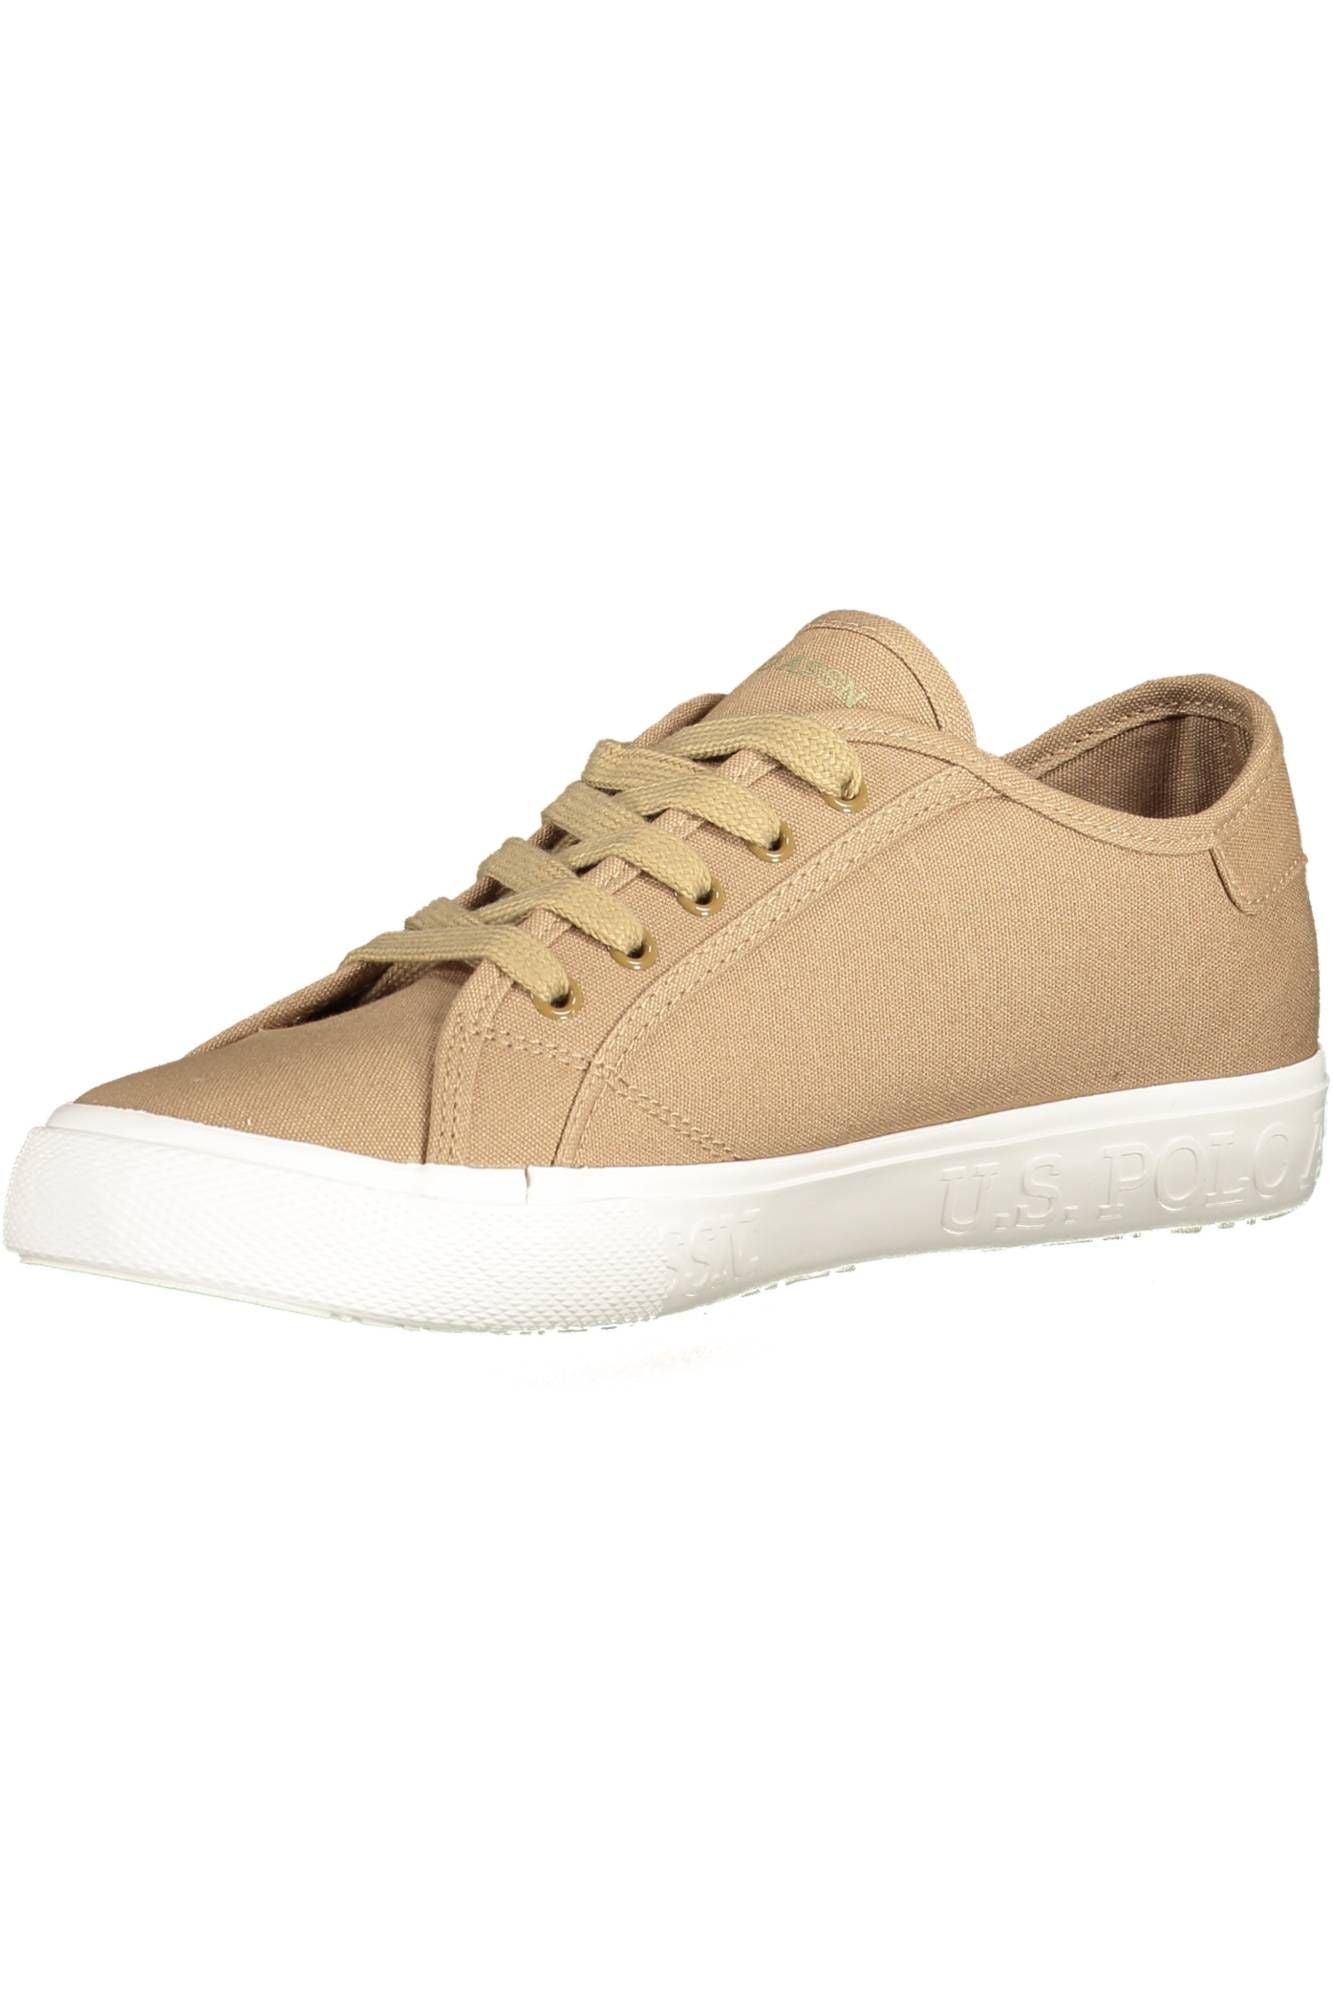 U.S. POLO ASSN. Chic Brown Lace-Up Sporty Sneakers